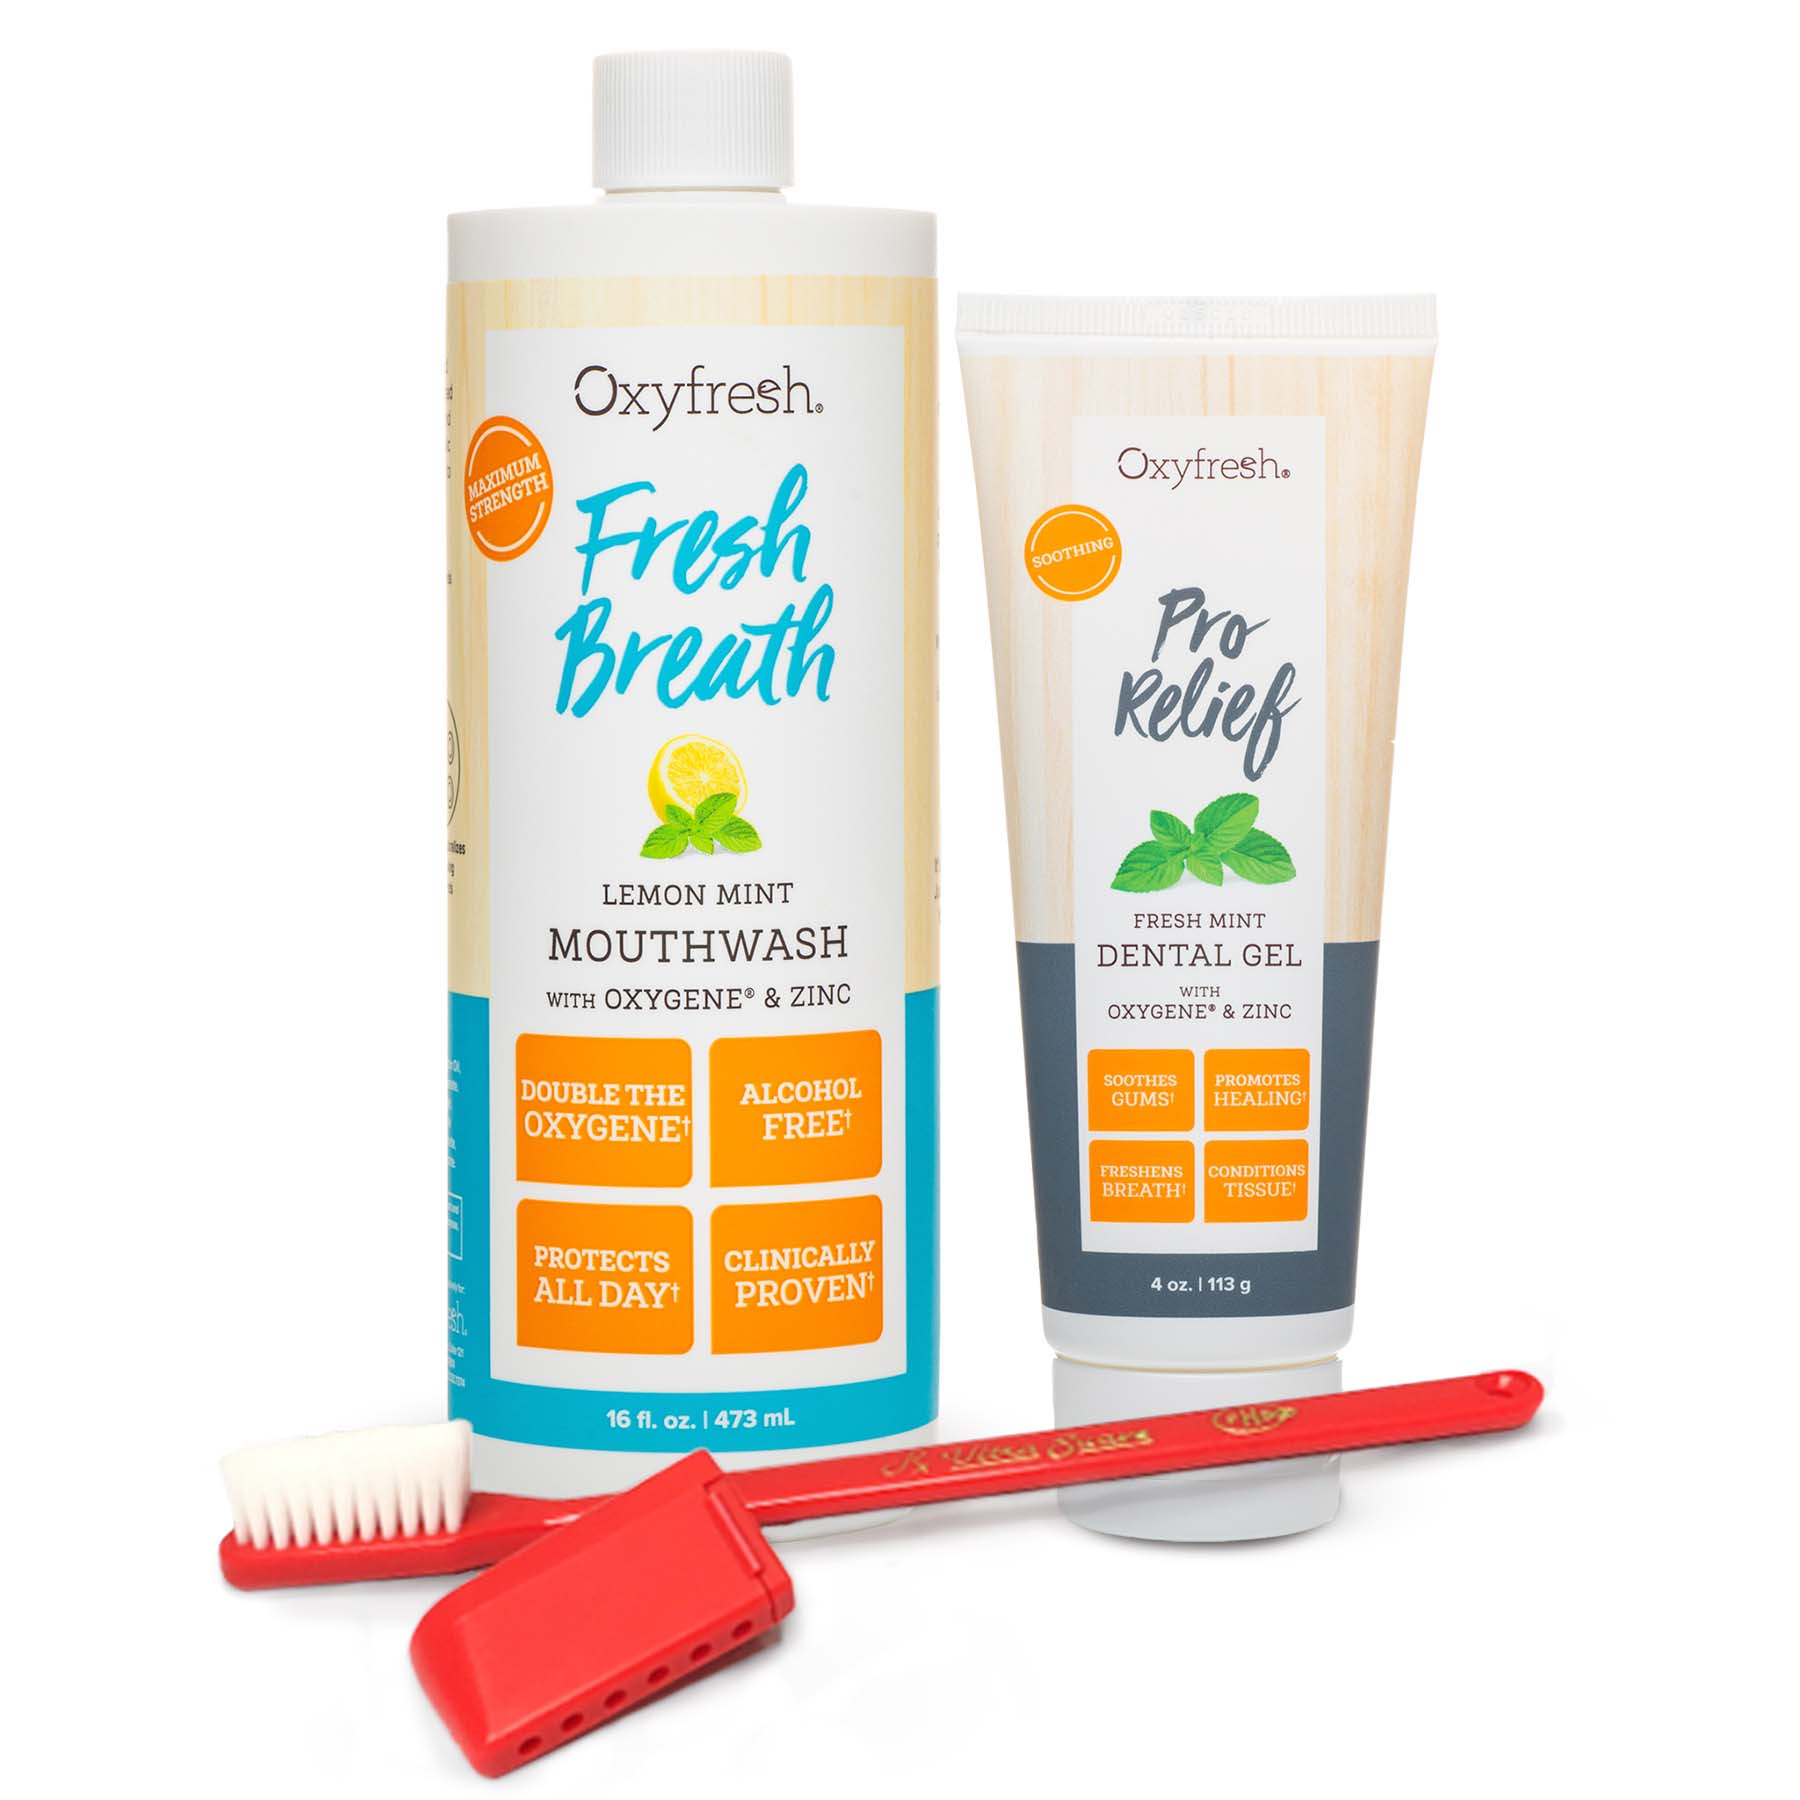 oxyfresh-post-surgical-care-system-including-fresh-breath-mouthwash-pro-relief-dental-gel-and-post-surgical-toothbrush